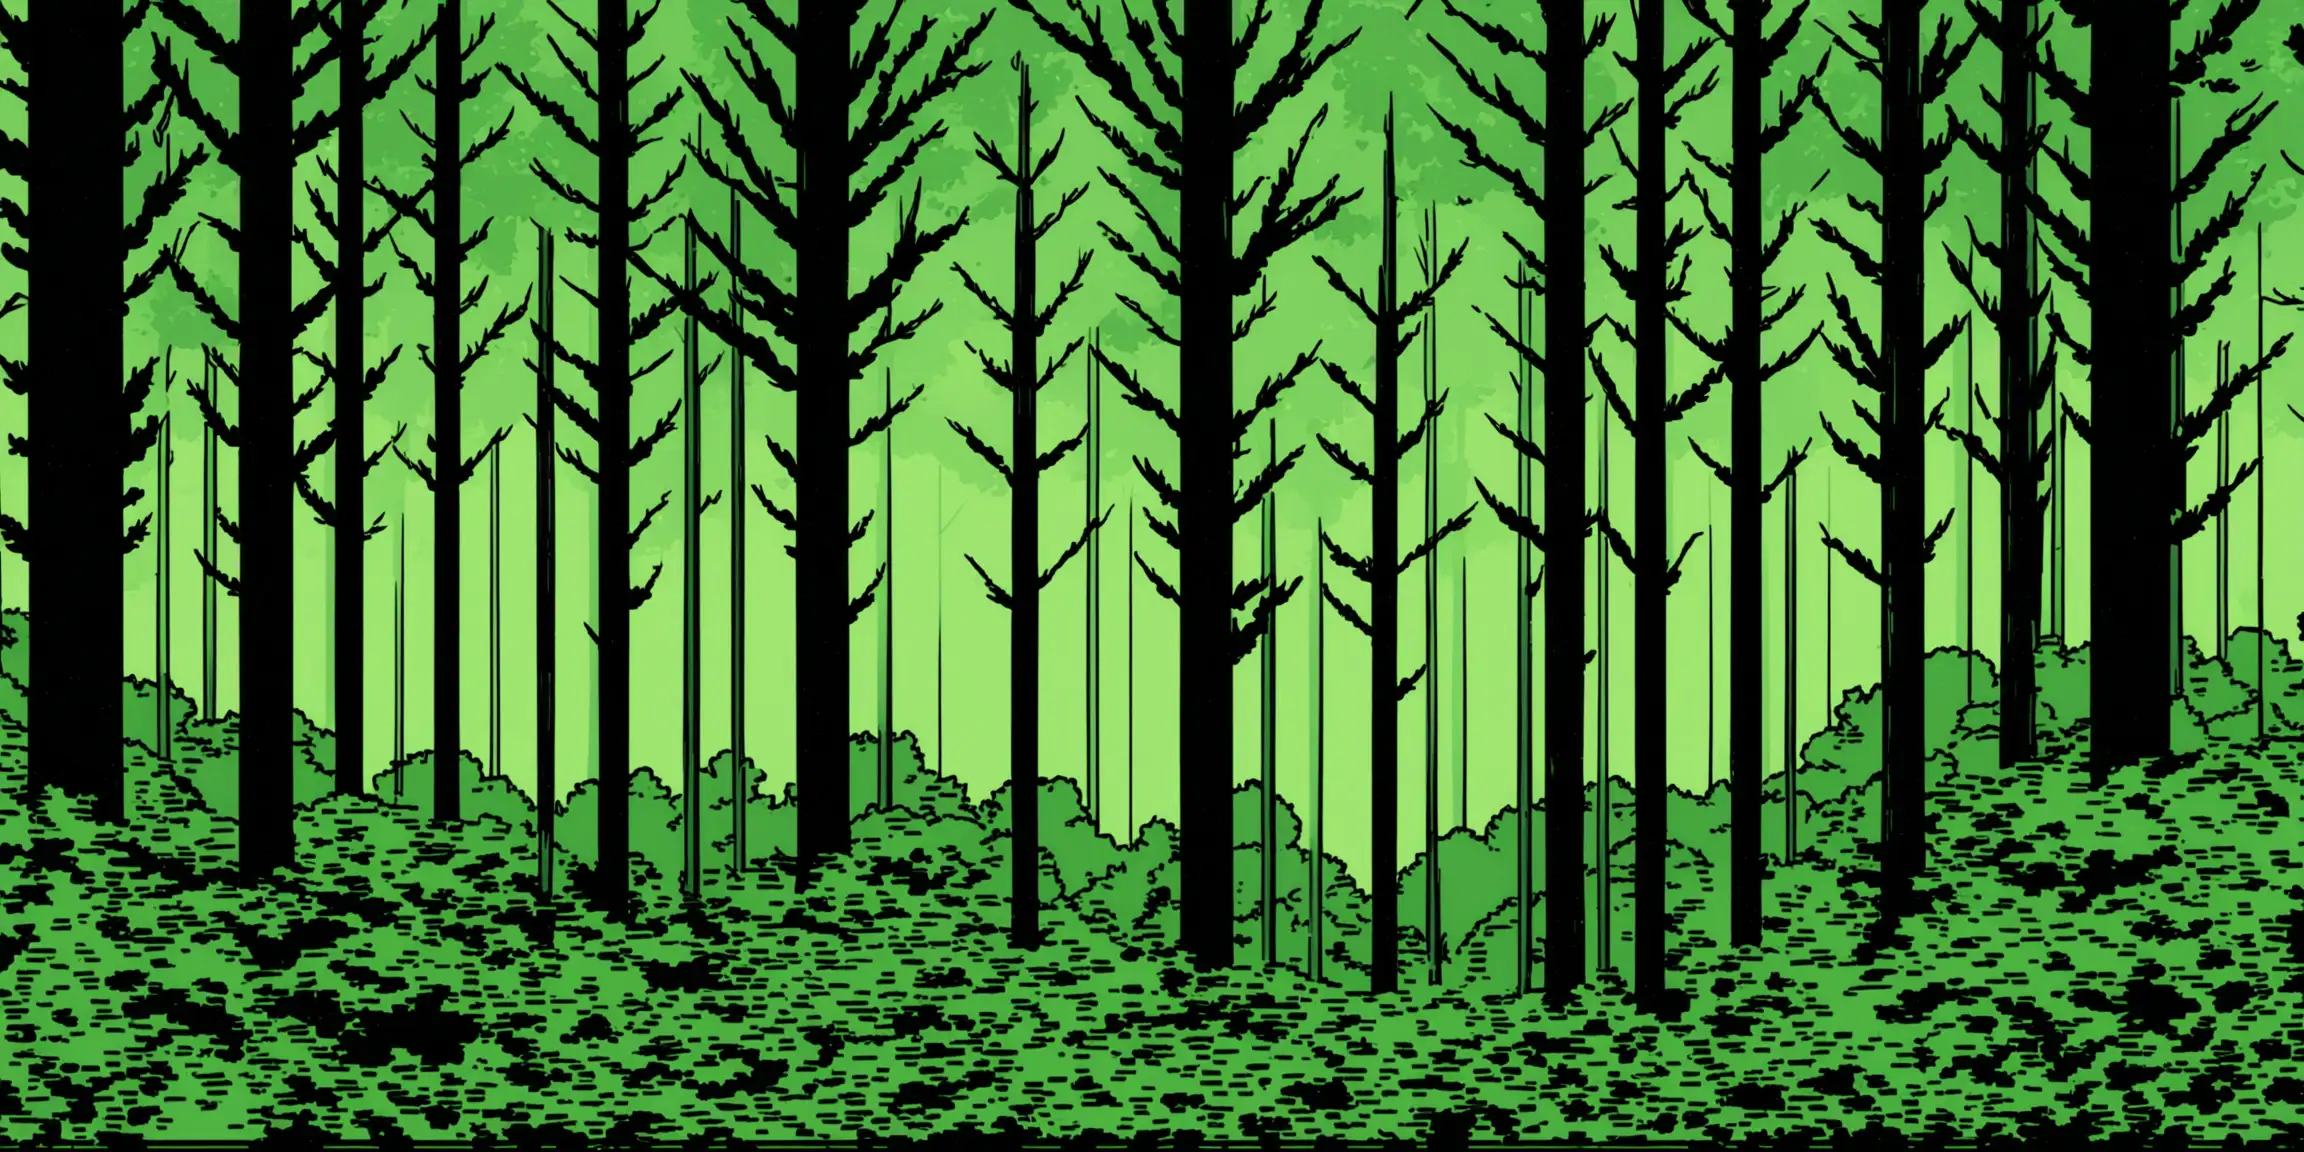 Comic Book Style Forest Landscape with Flat Profile